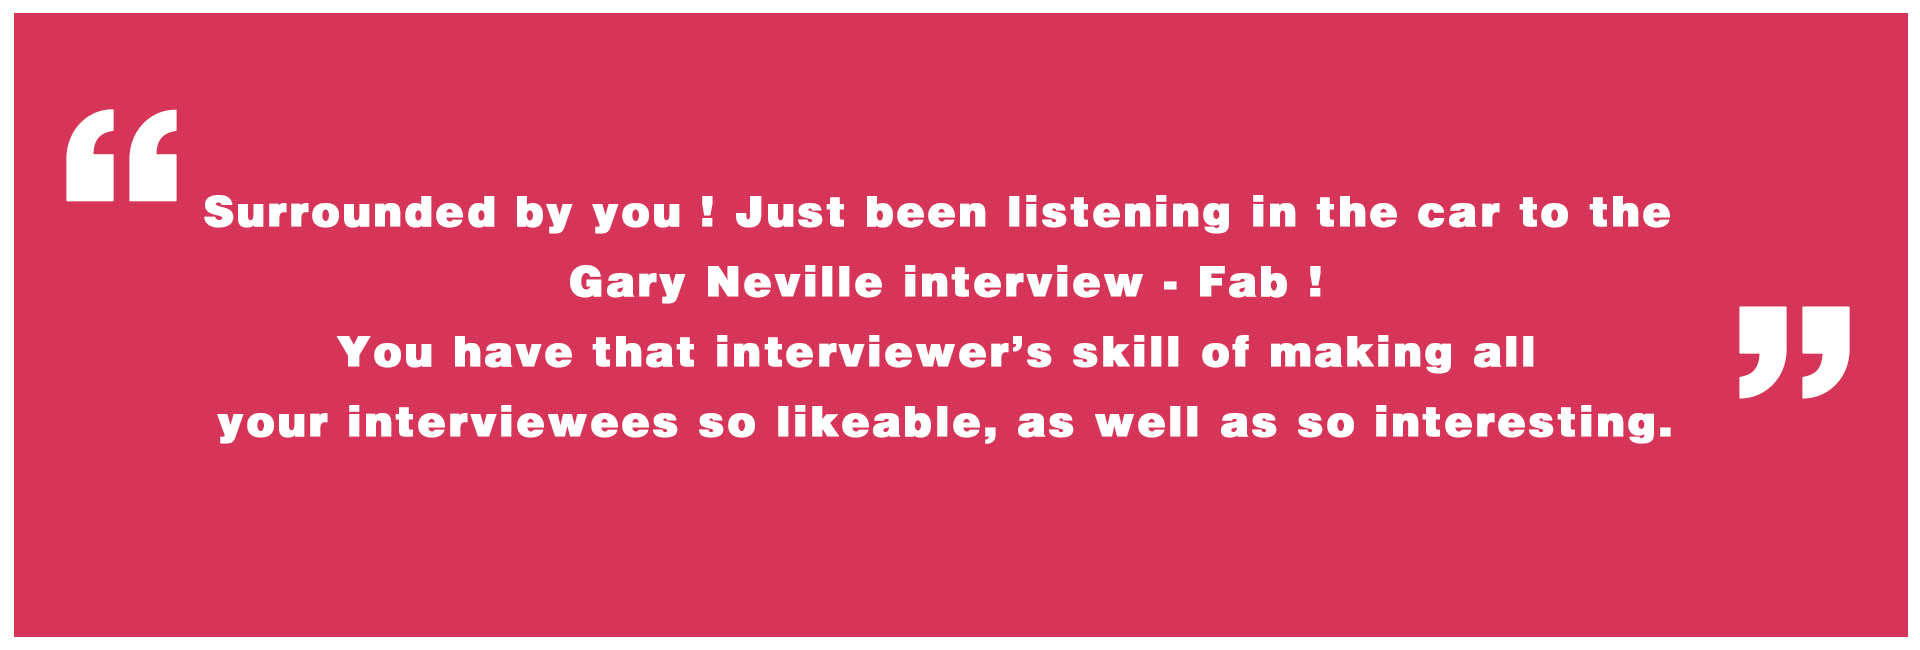 Quote about Gary Neville